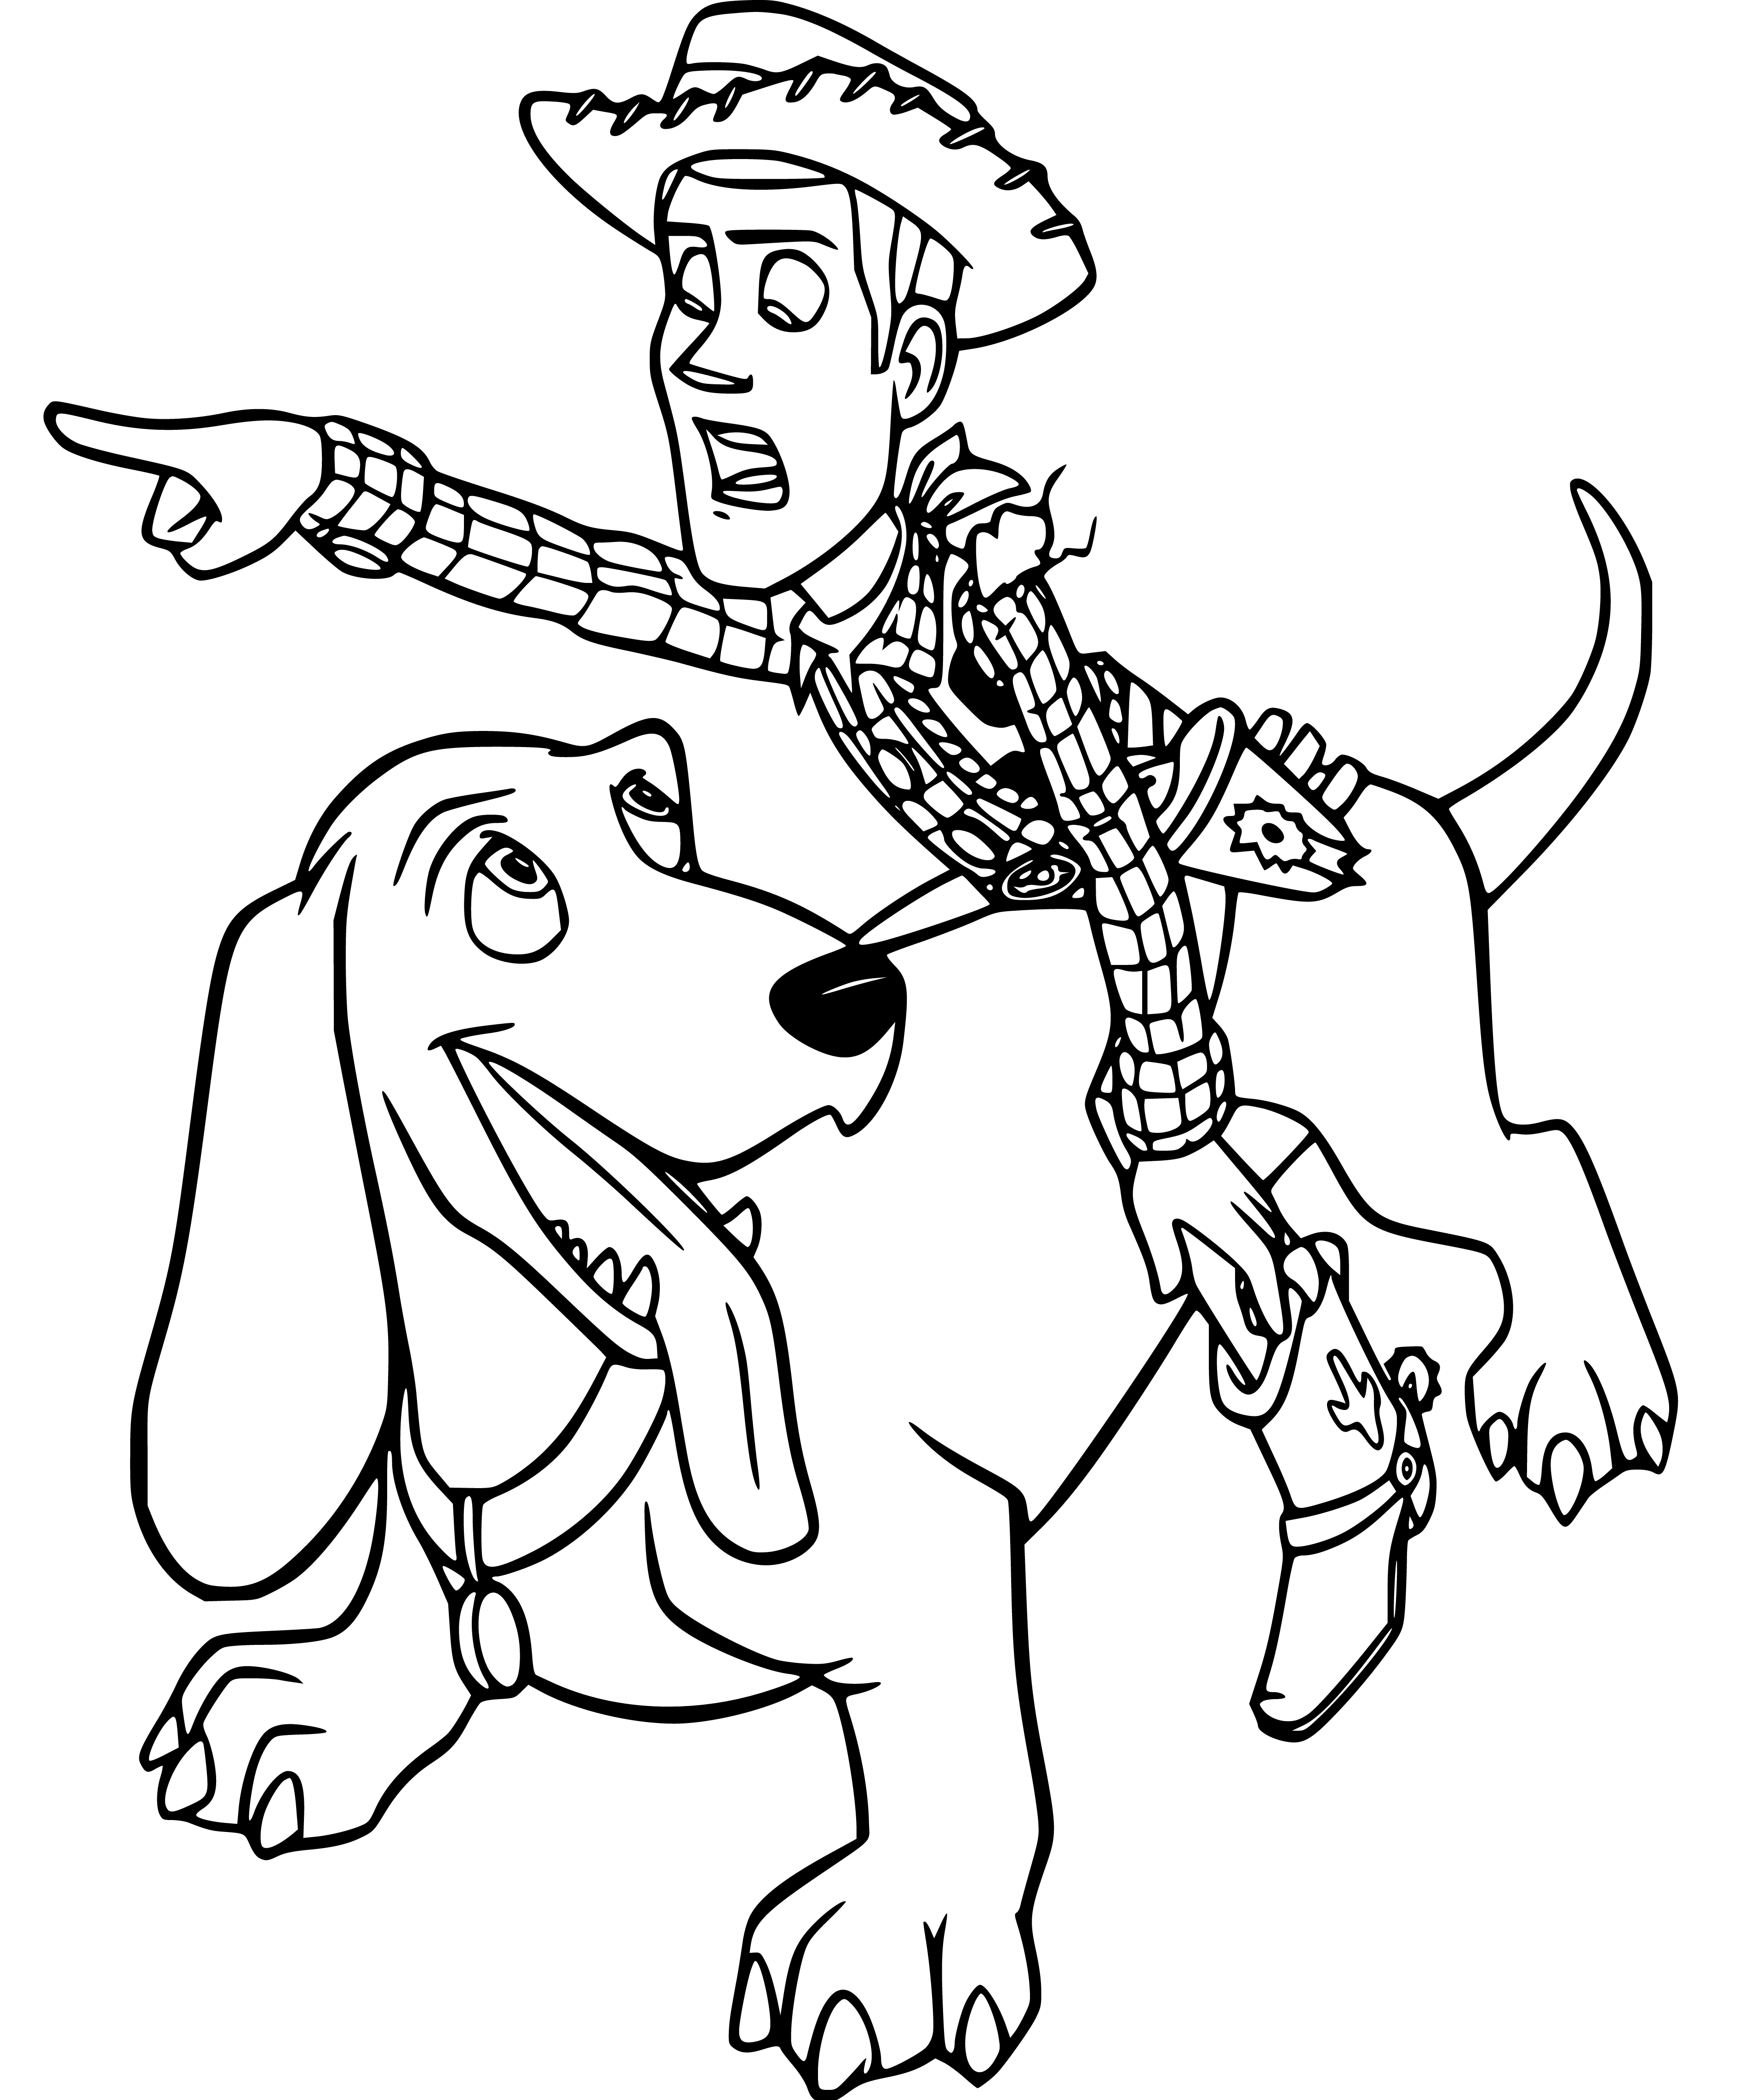 Toy Story Woody Coloring Pages - SheetalColor.com